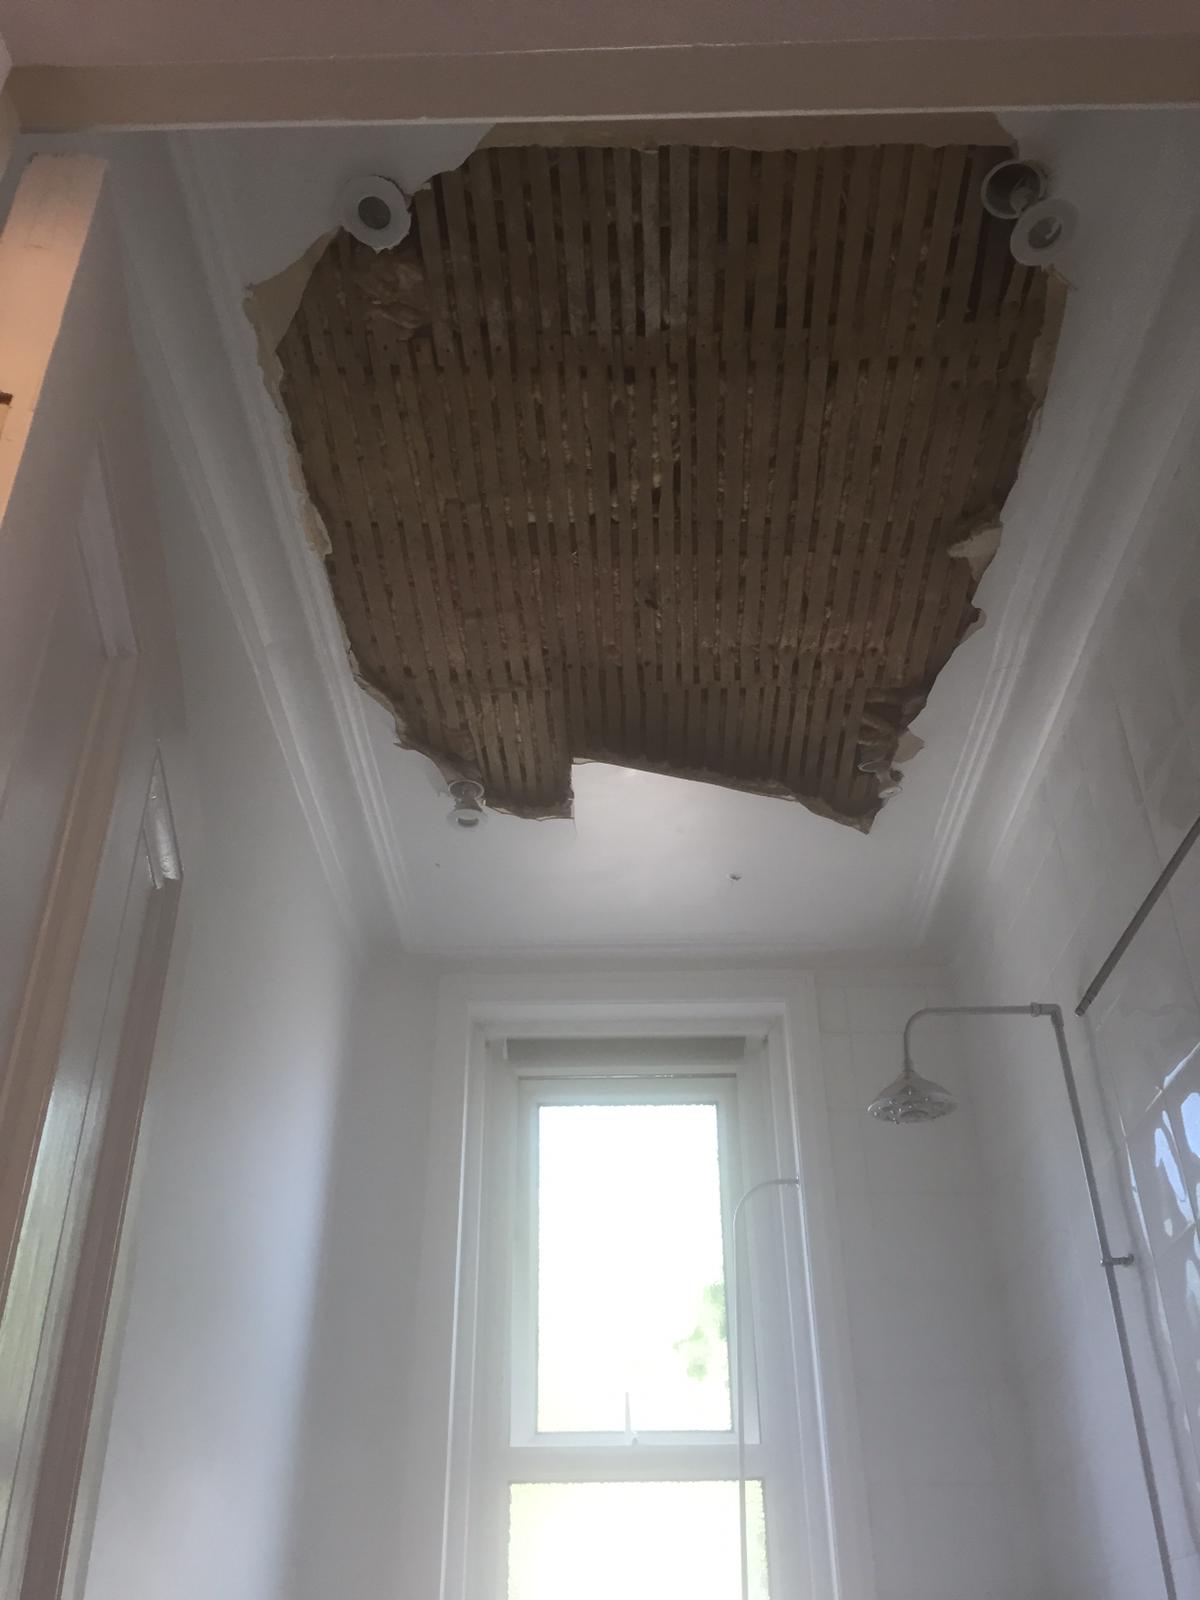 Plaster and lath ceiling collapse - Page 1 - Homes, Gardens and DIY - PistonHeads